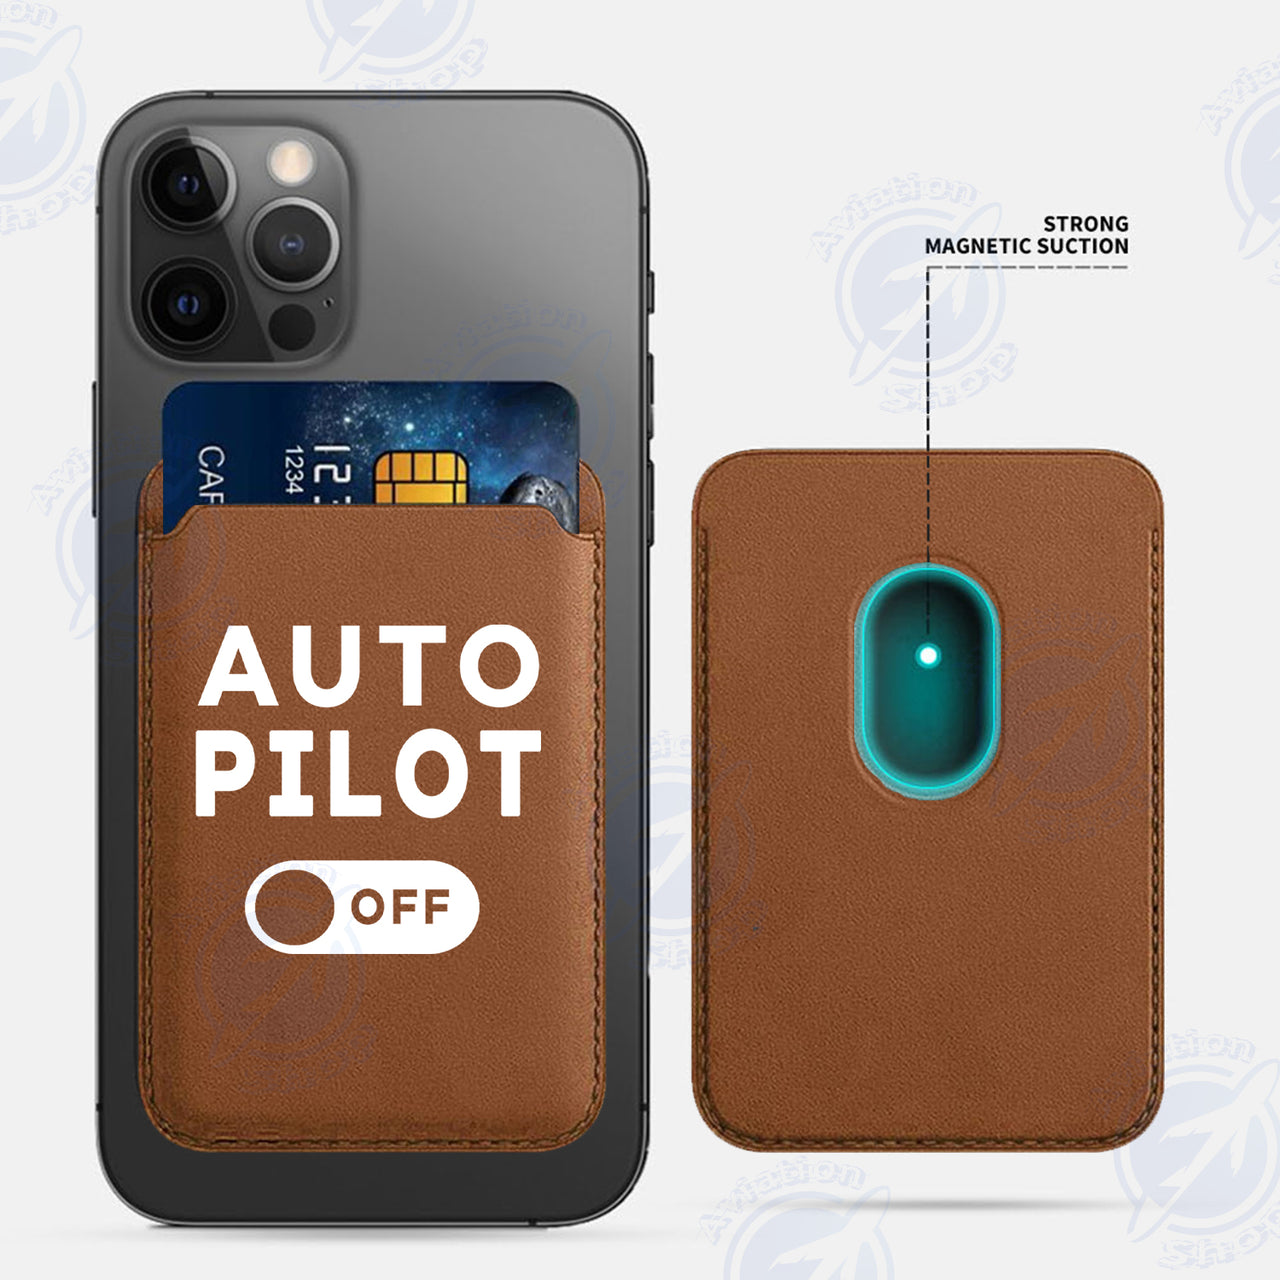 Auto Pilot Off iPhone Cases Magnetic Card Wallet